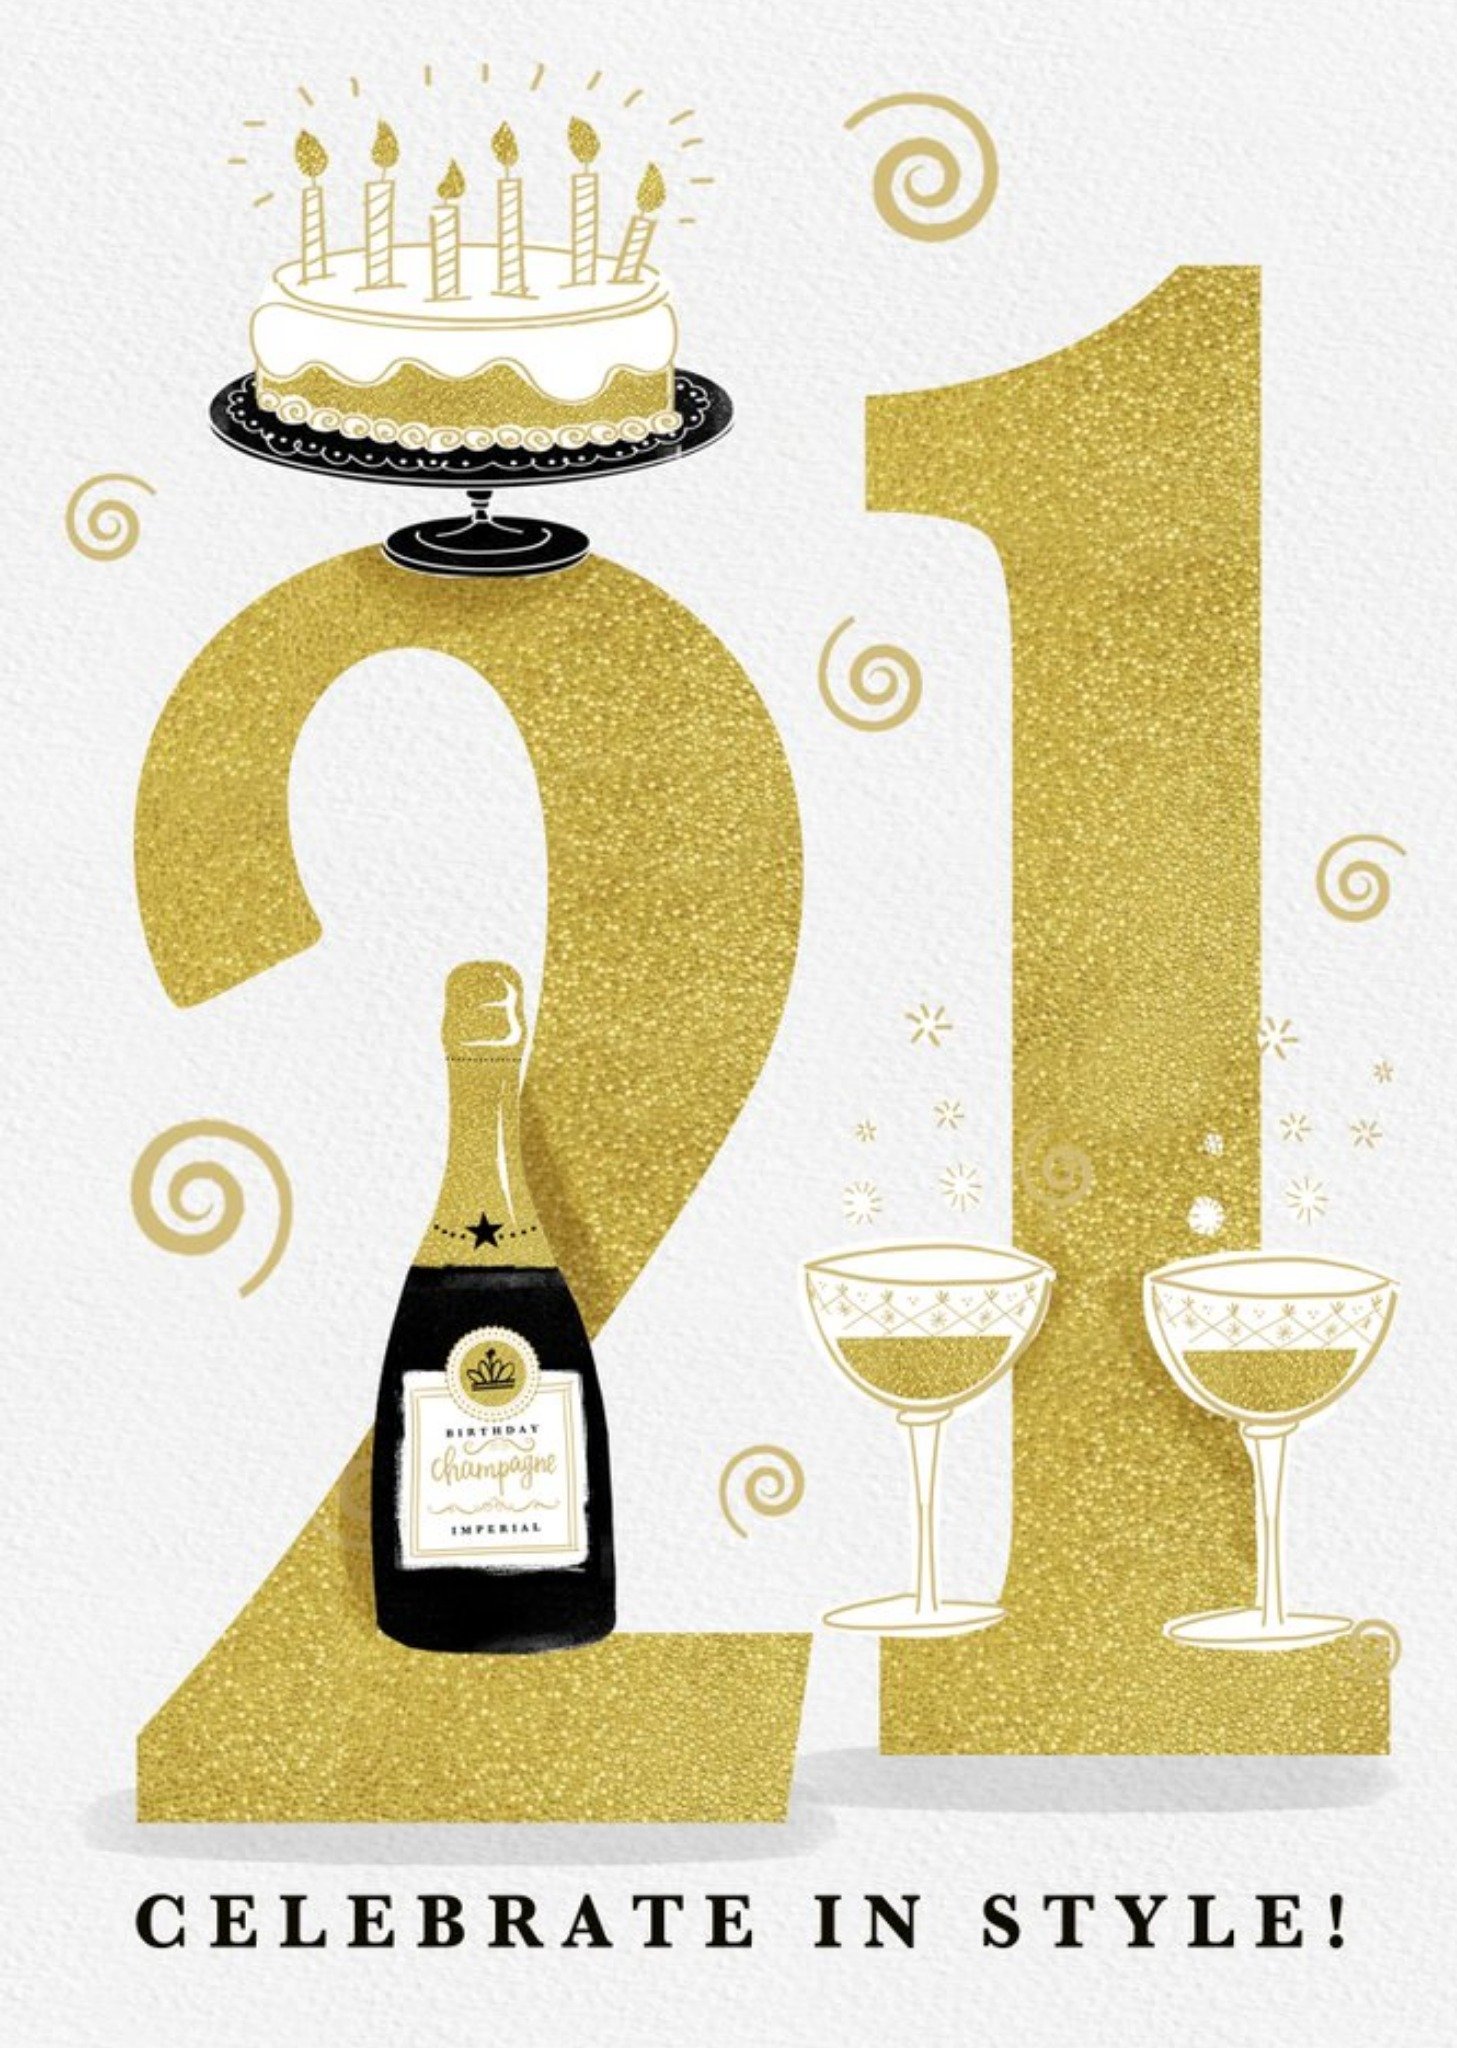 Moonpig Large Golden Number With Illustrations Of Cake And Wine Twenty First Birthday Card Ecard